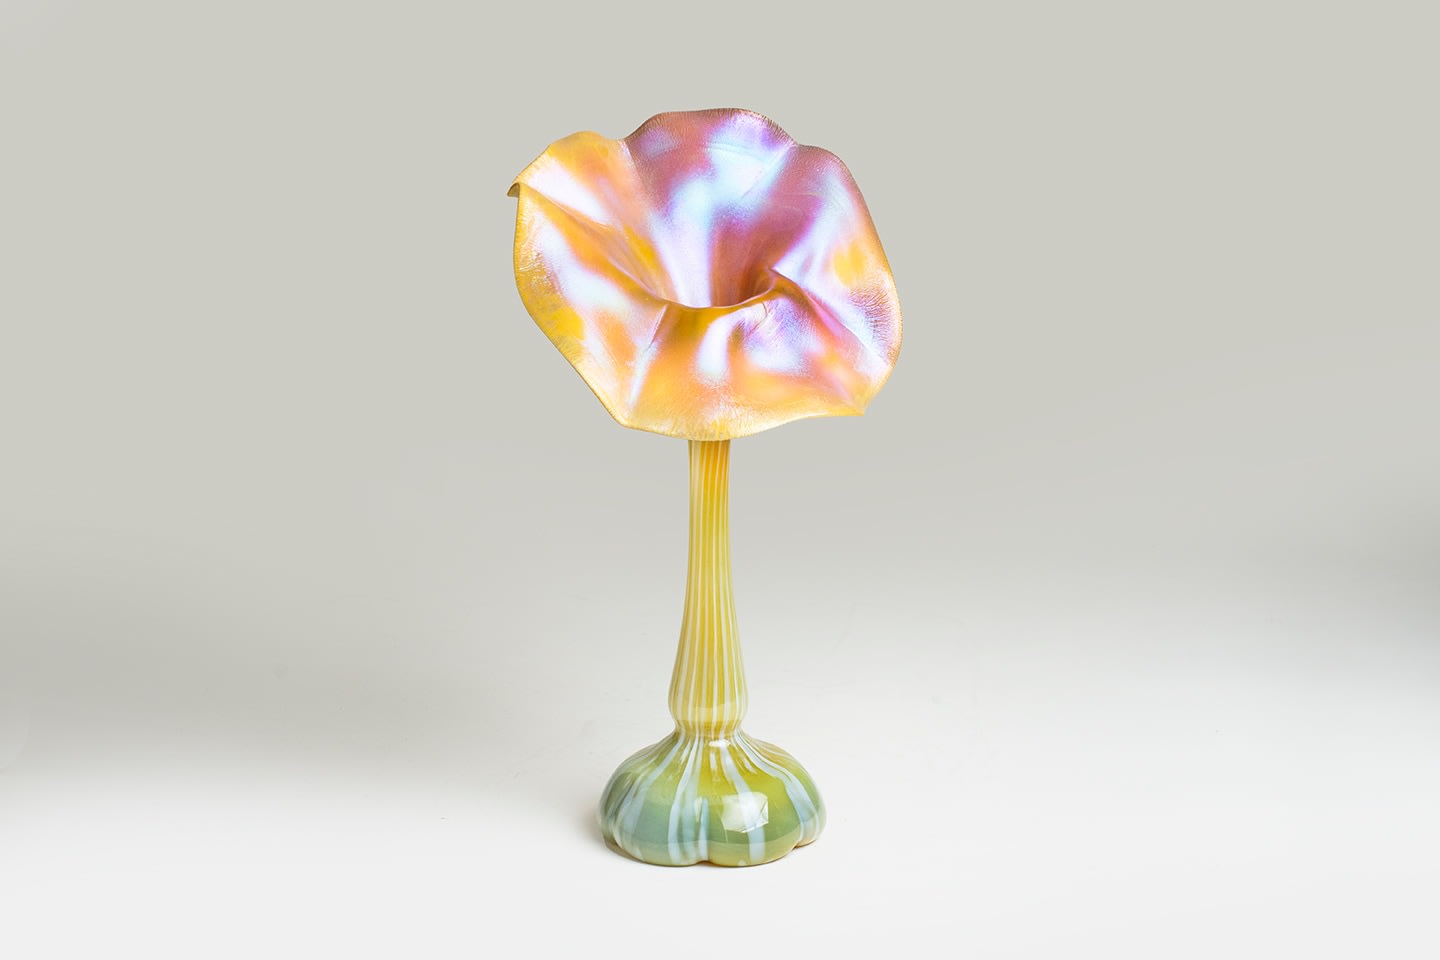 an early blown glass tiffany favrile vase, a pillowed domed foot rising to thin cylindrical stem, with a round flared flower &quot;face&quot; with sculptural waved edges, in yellow tiffany favrile glass with white striations and silvery magenta surface iridescence